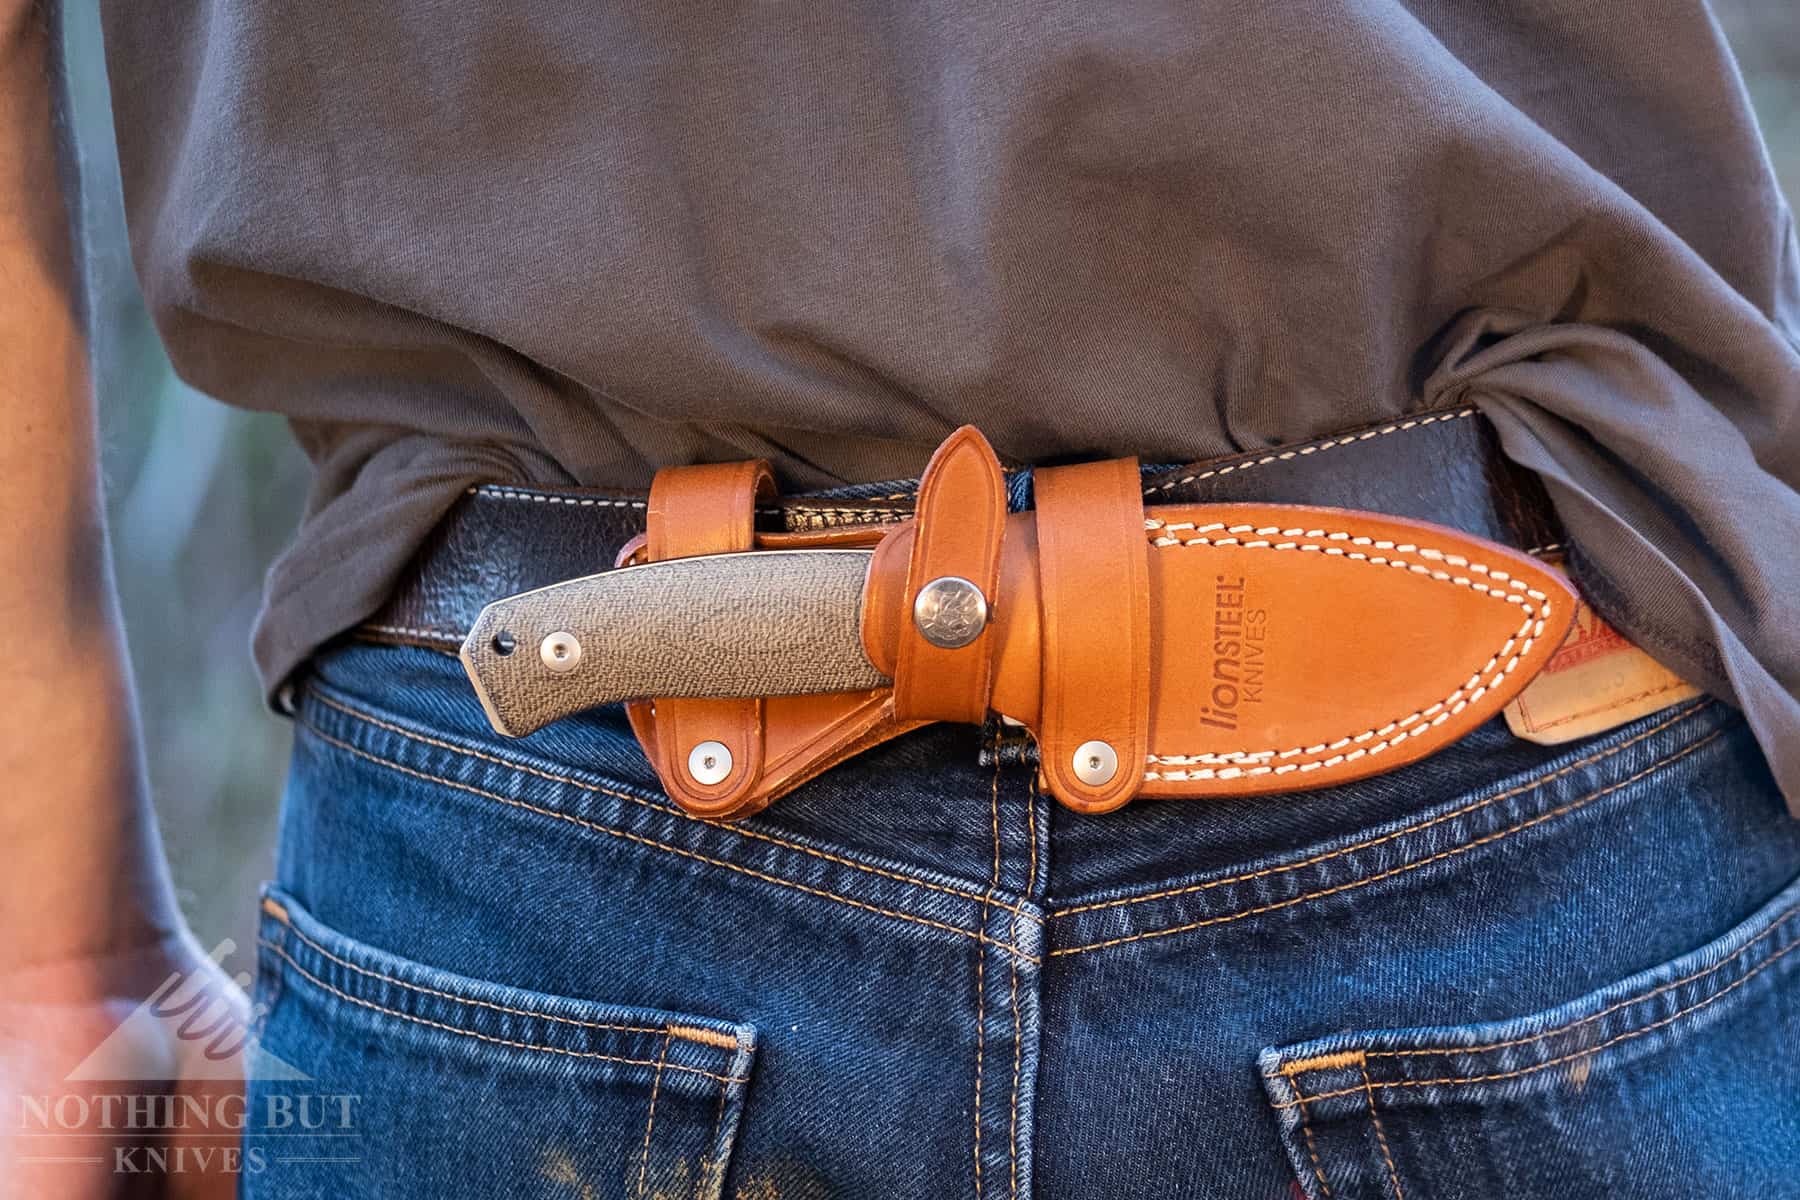 The LionSteel M2M is an excellent hunting and survival knife, but the sheath can only be worn in the left handed position when configured for scout carry.